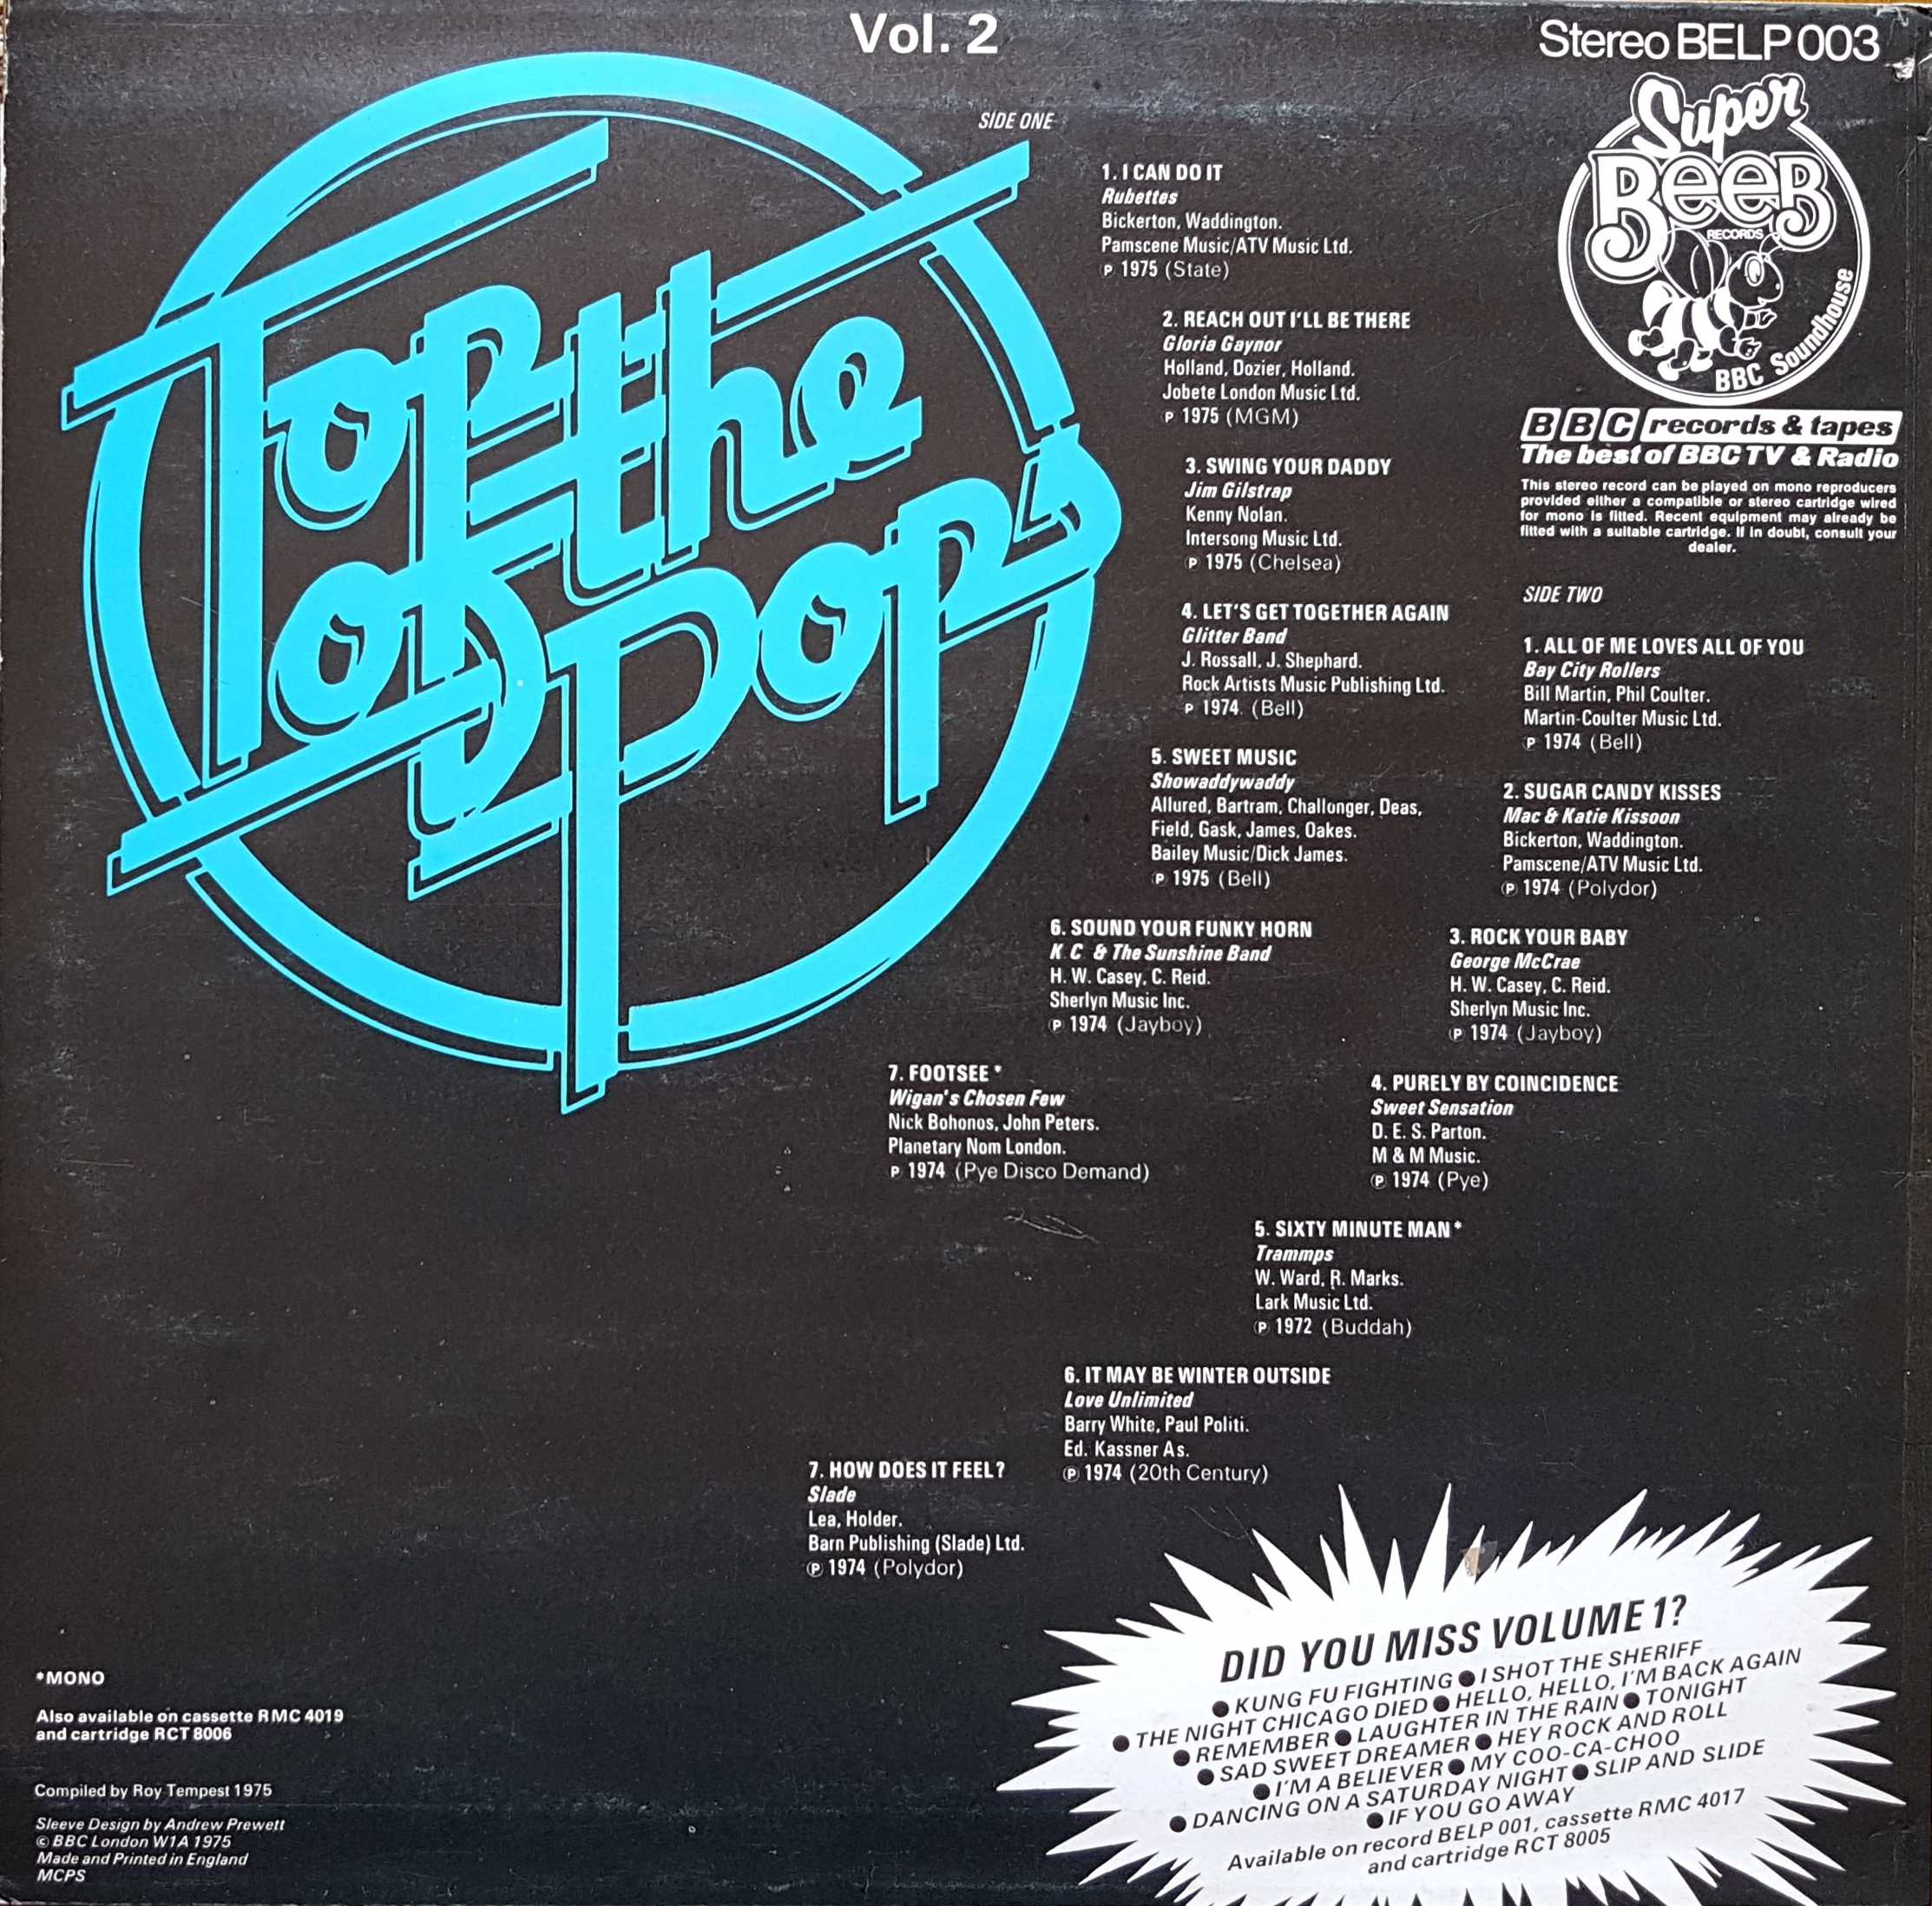 Picture of BELP 003 Top of the pops - Volume 2 by artist Various from the BBC records and Tapes library